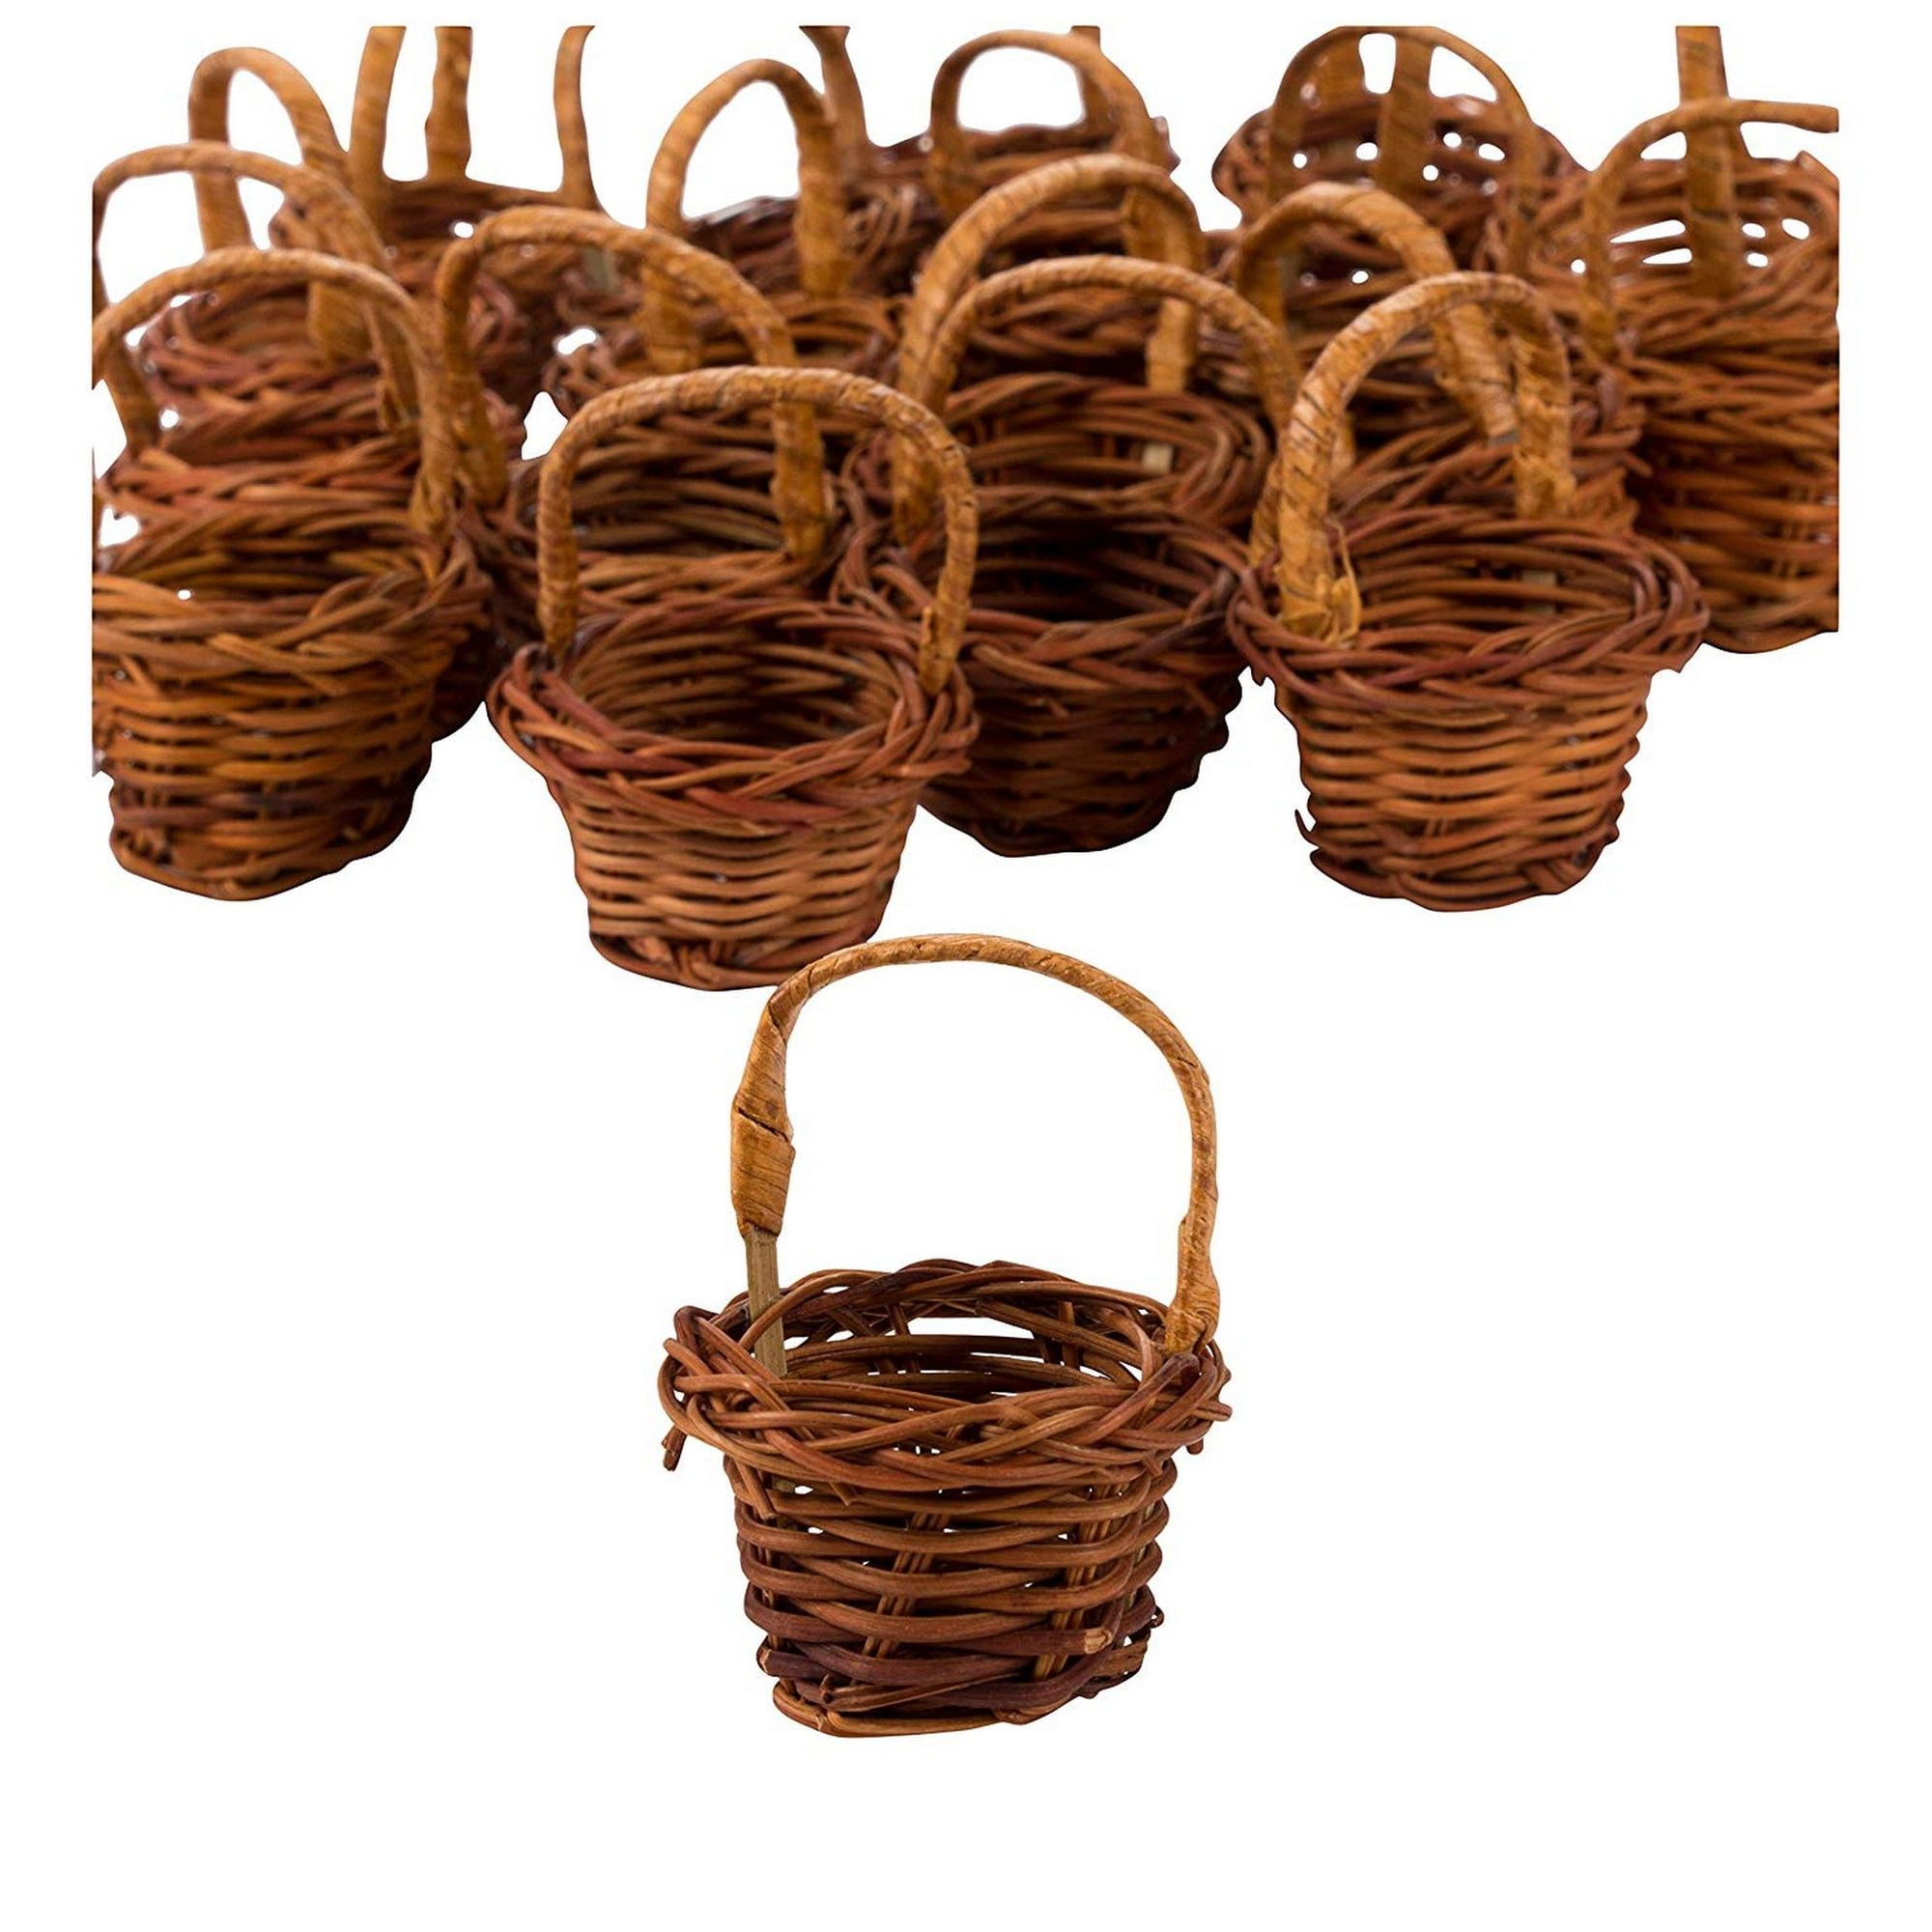 Mini Baskets- 24-Pack Miniature Woven Baskets with Handles, Mini Round